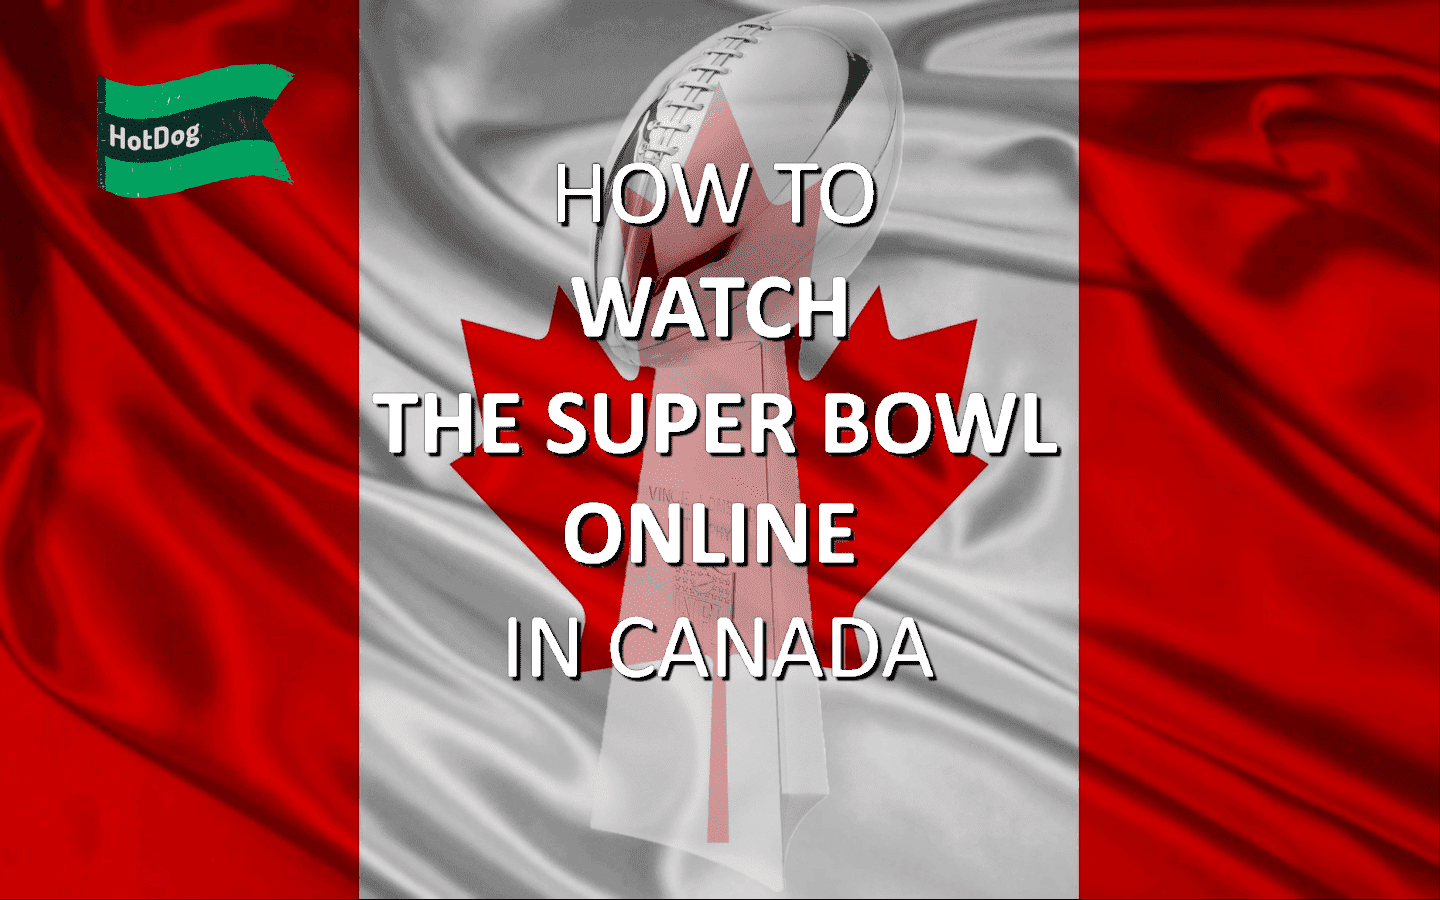 Anyone Can Watch the Super Bowl In Canada - Heres How to Tune In Online